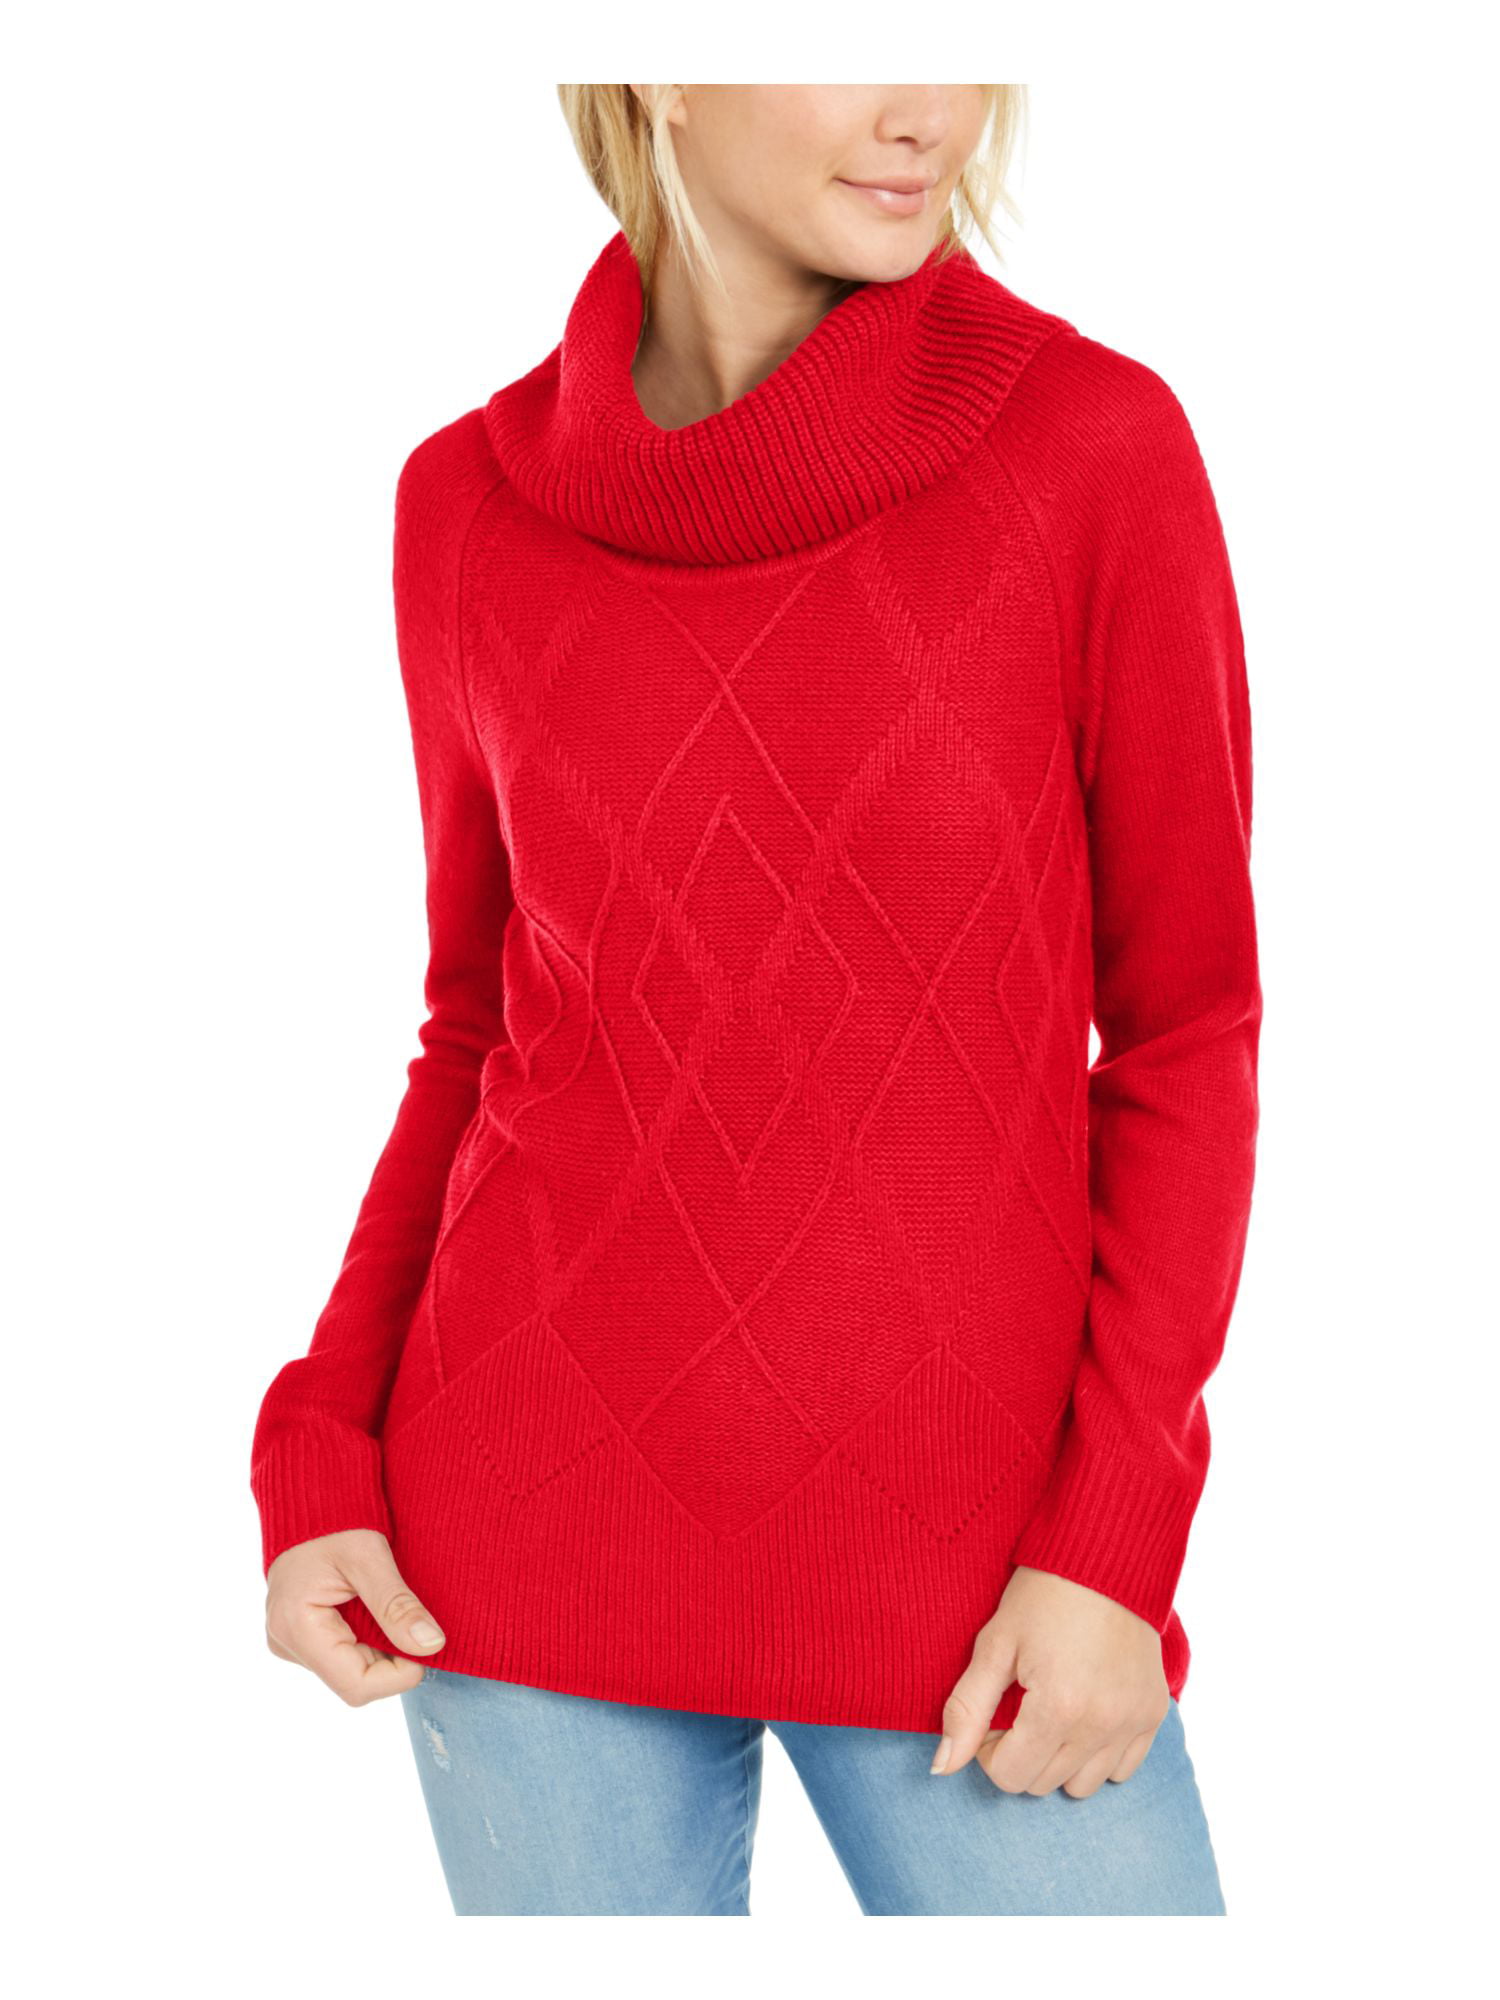 TOMMY HILFIGER Womens Red Cable Knit 